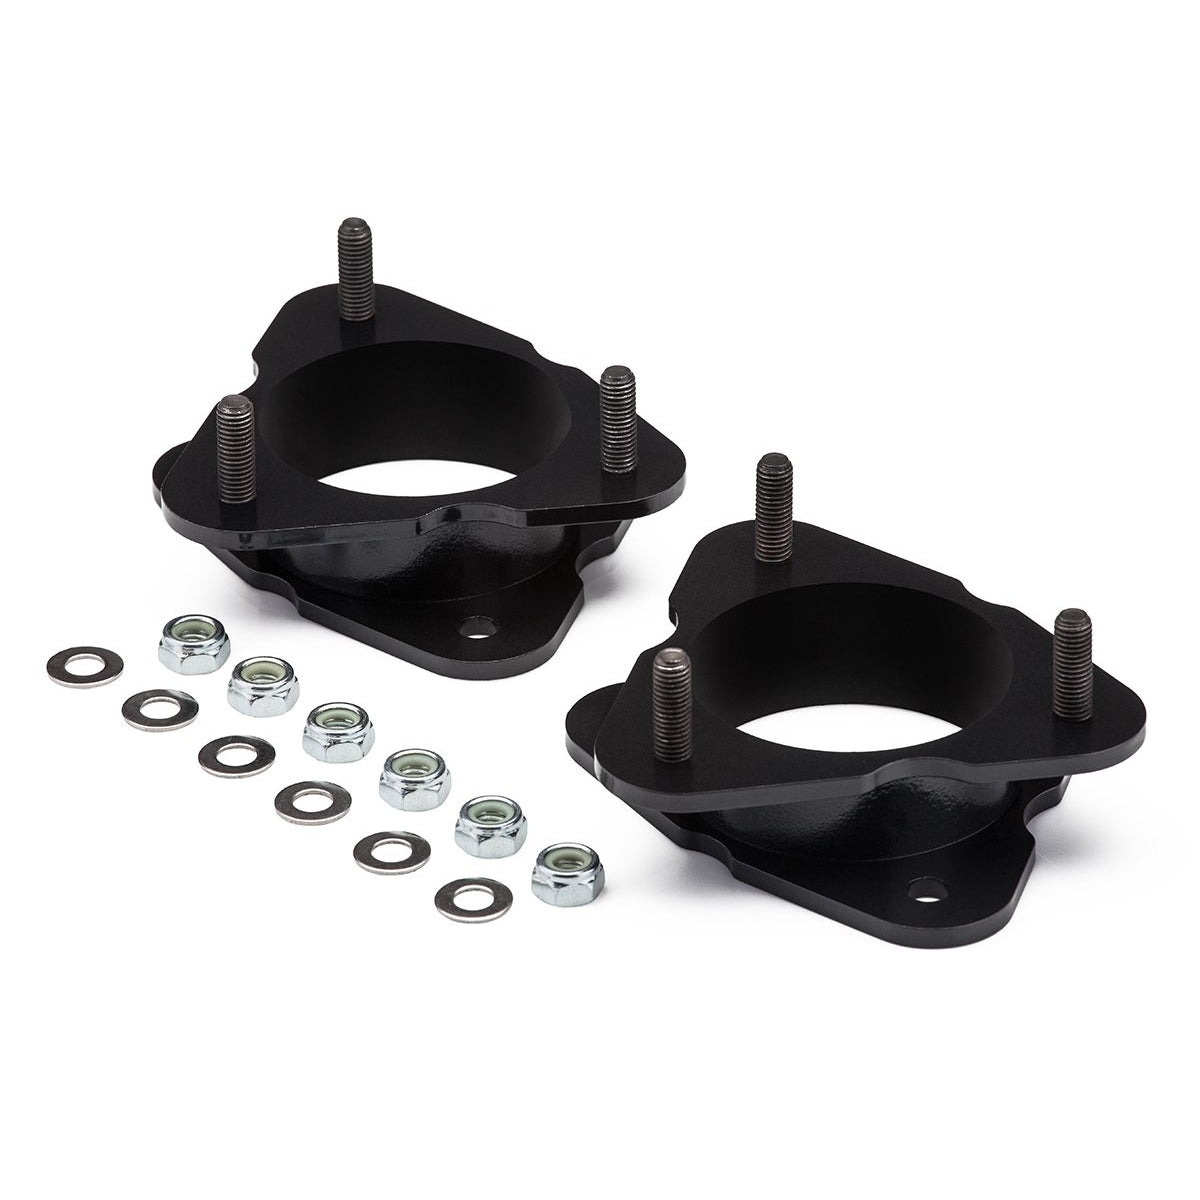 2007-2023 Chevy Suburban 1500 Front Lift Kit with Bump Stops